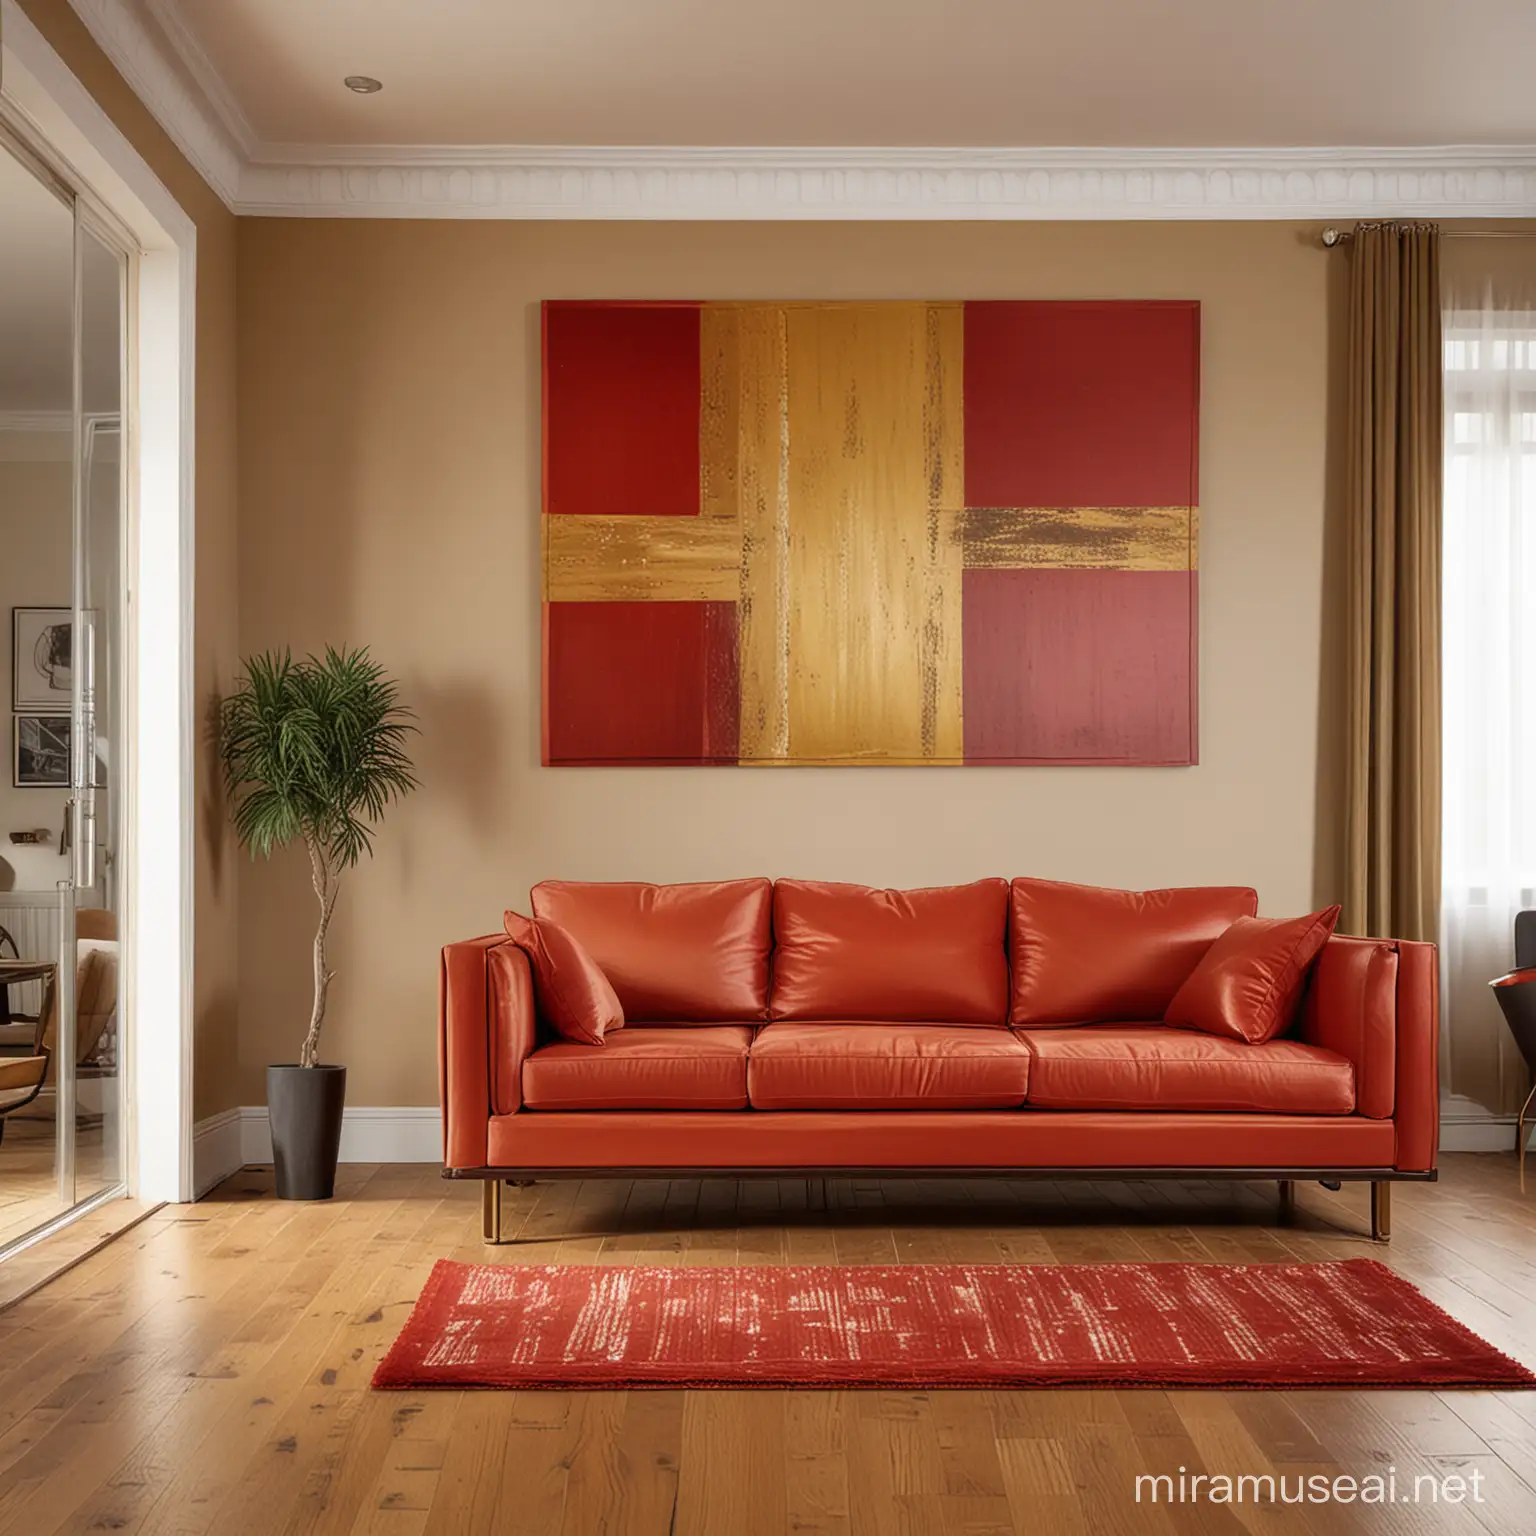 Warm and Inviting Living Room with Wooden Floor and Artwork